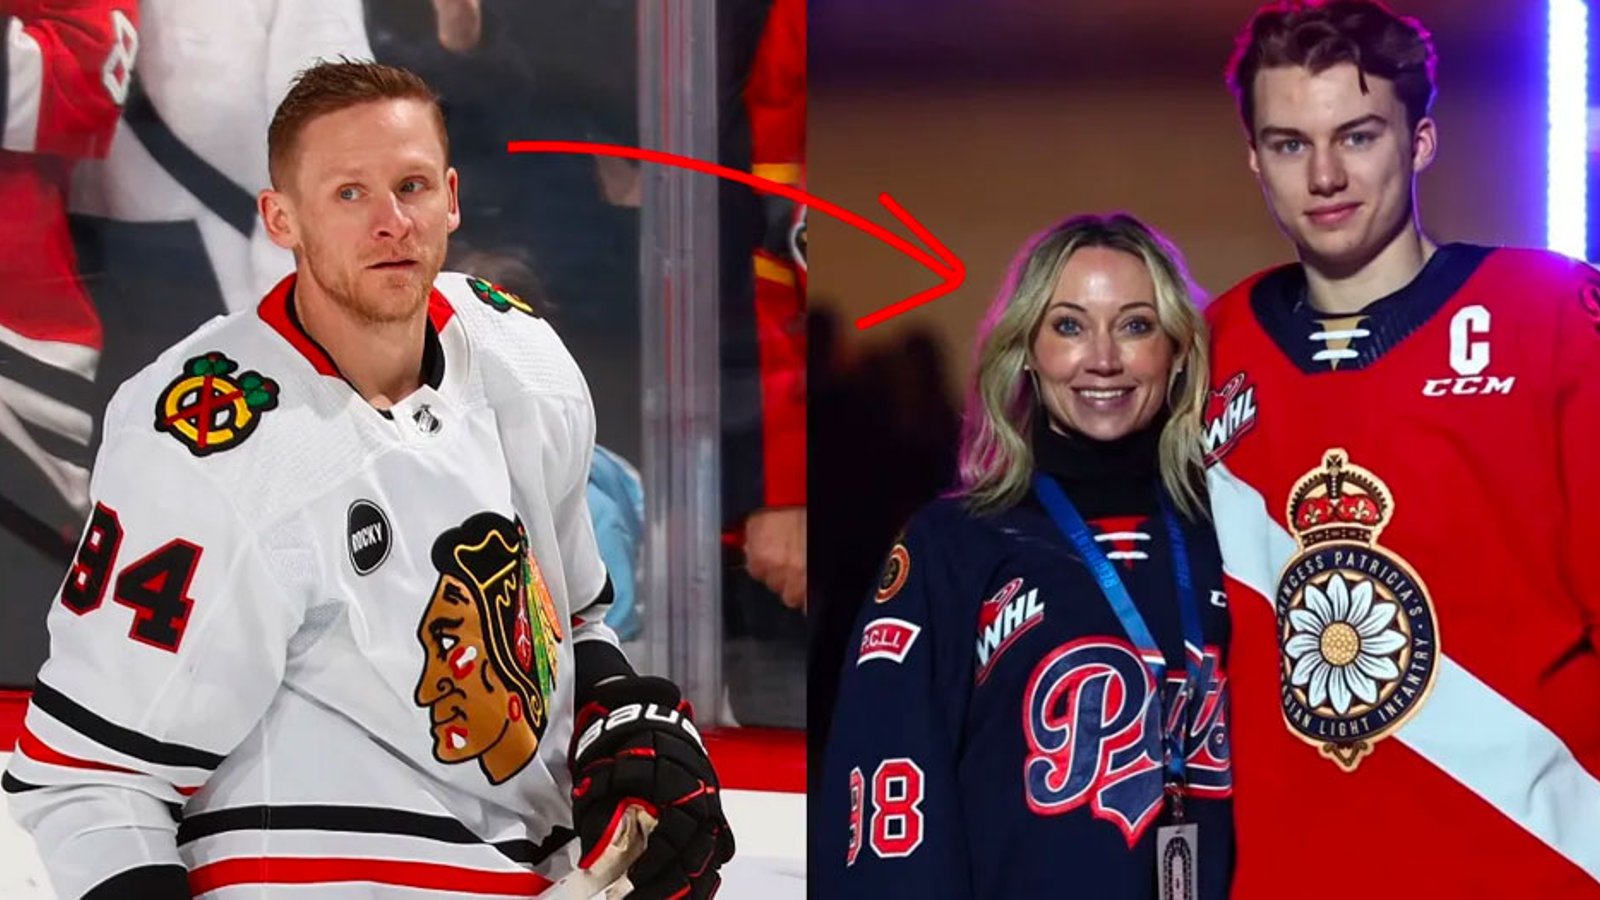 Blackhawks flat out deny that anything happened between Corey Perry and Melanie Bedard